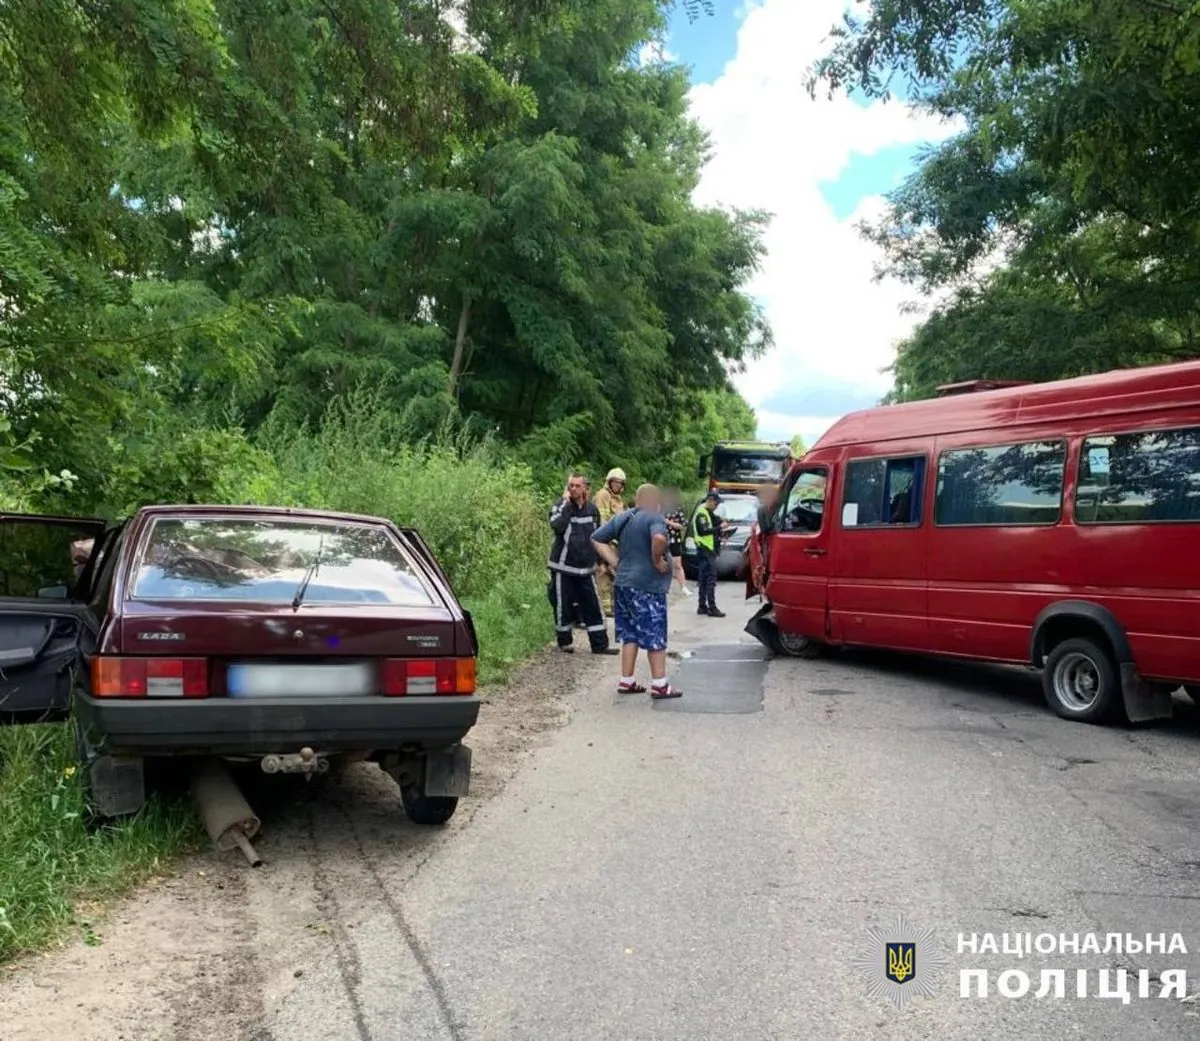 near-kiev-a-minibus-with-passengers-collided-with-a-passenger-car-two-people-were-hospitalized